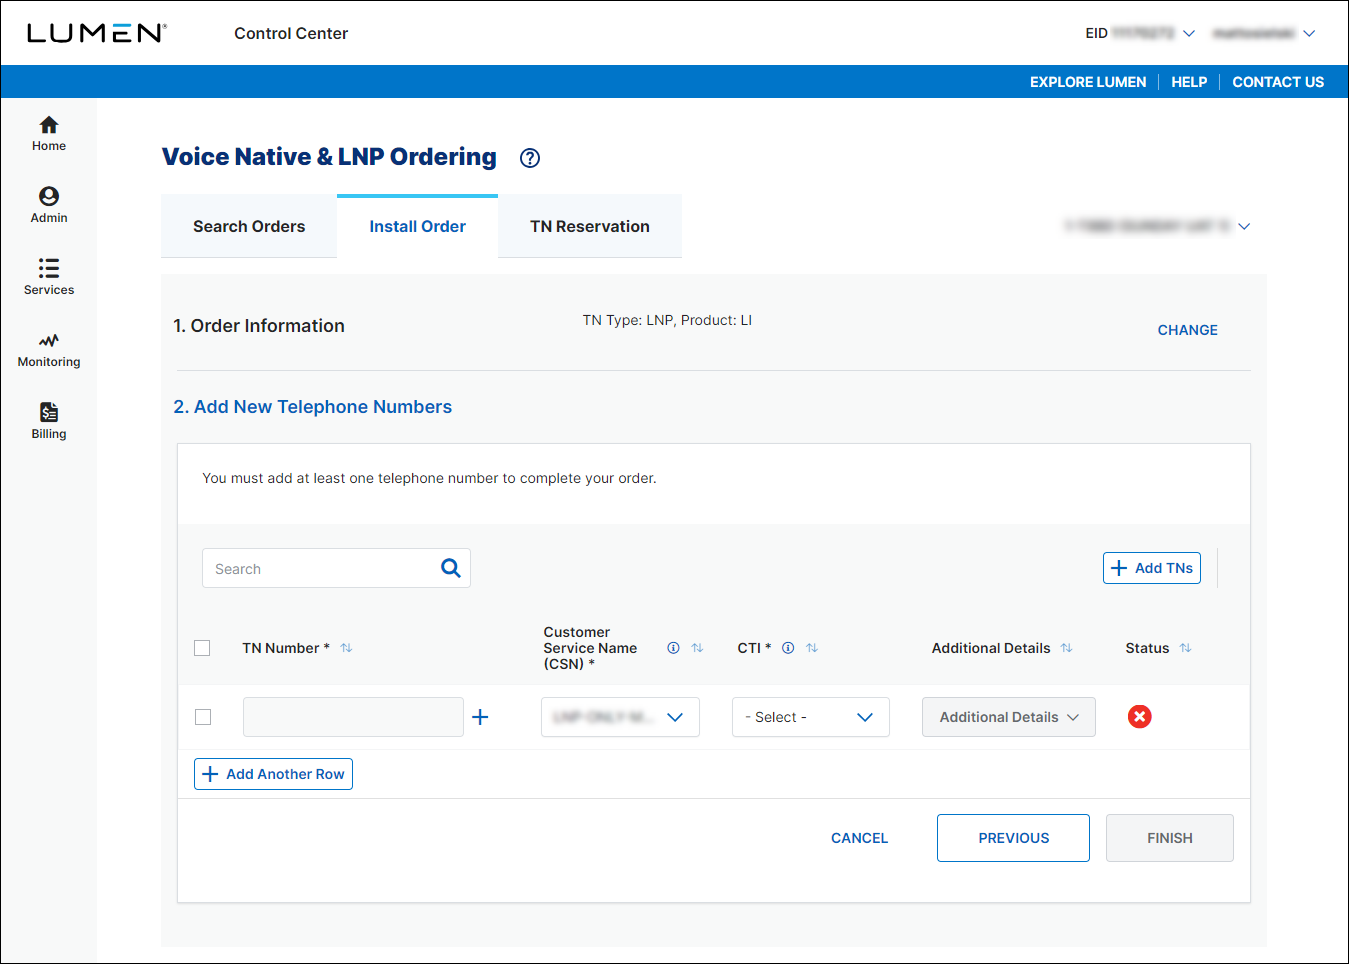 Voice Native & LNP Ordering (showing Install Order tab and Add New Telephone Numbers section for LNP LI)